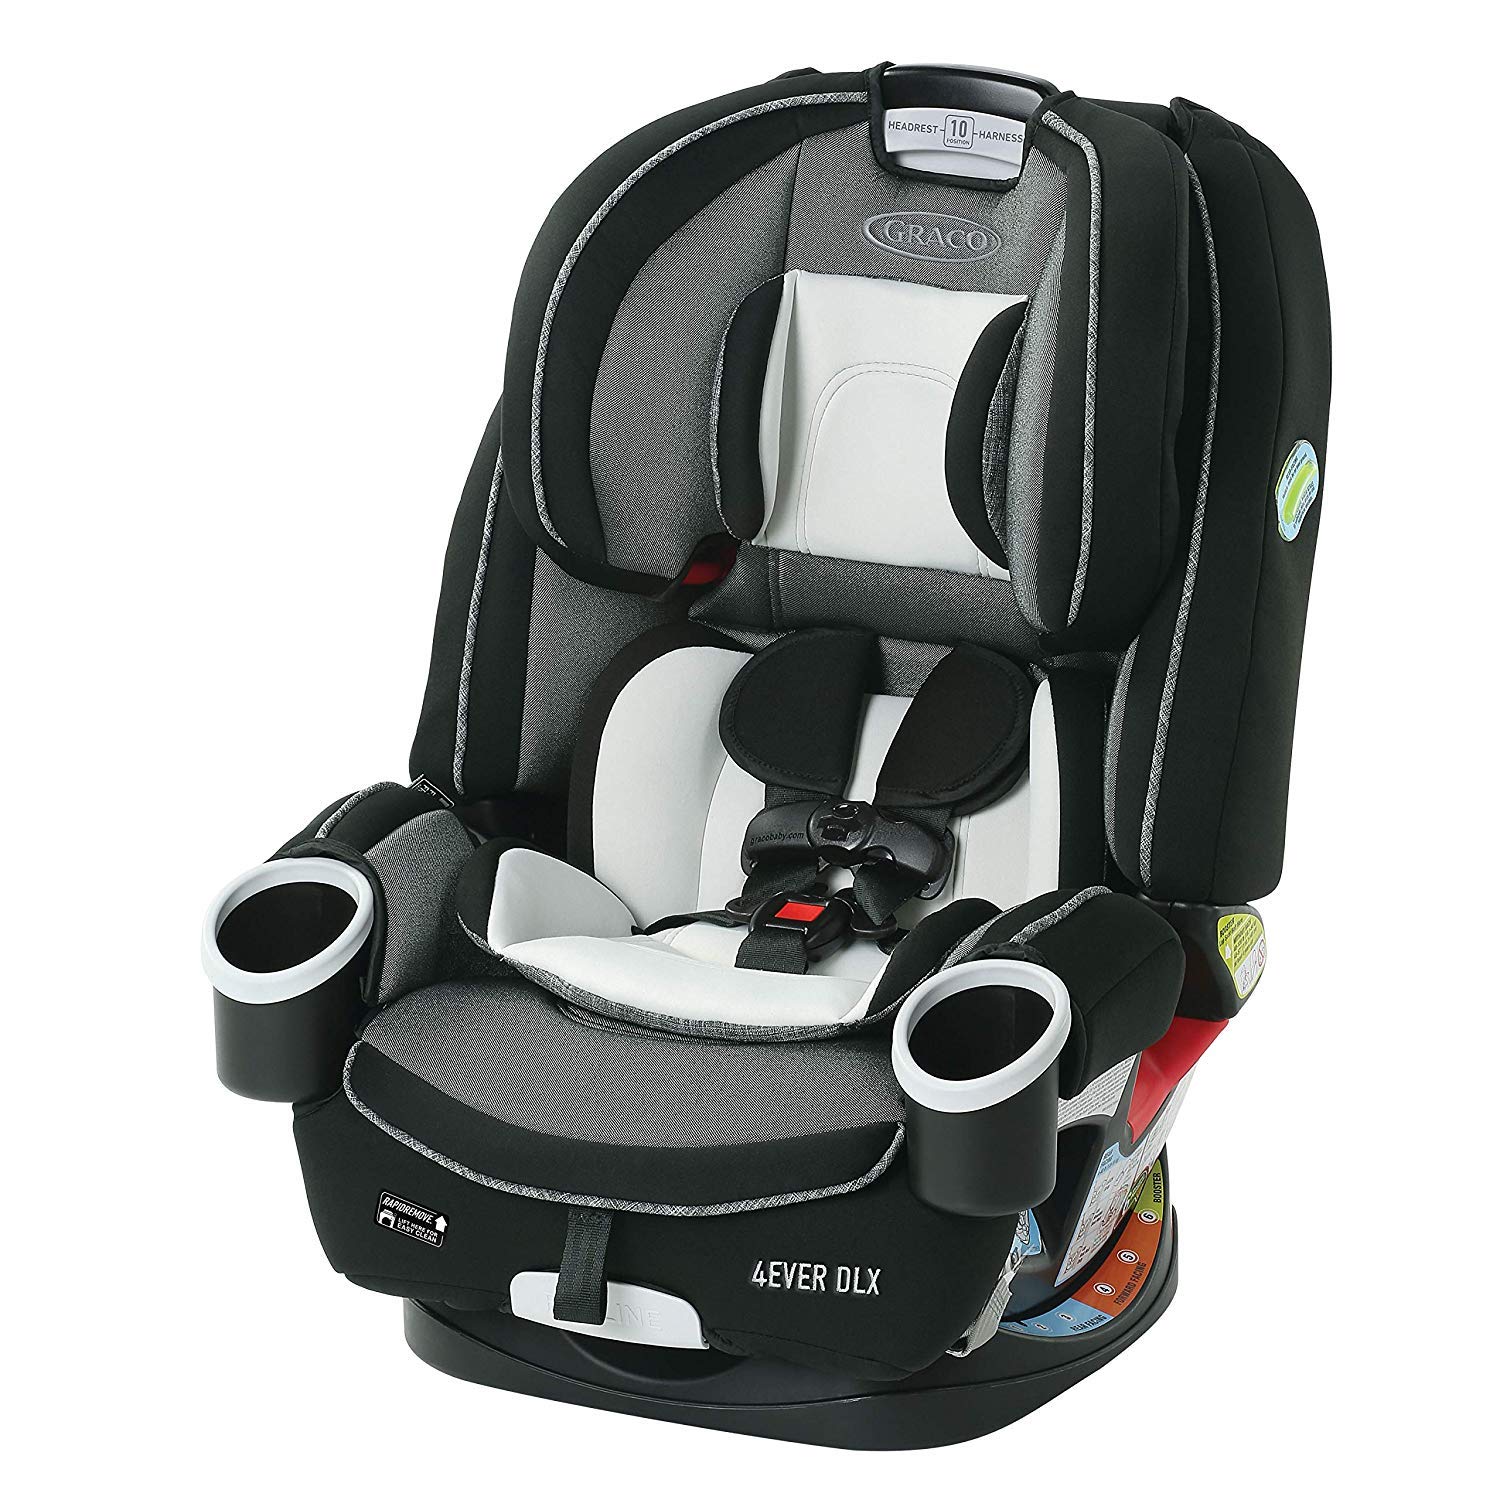 Car Seat in a Truck With Extended Cab, Graco 4Ever DLX 4 in 1 Car Seat, 